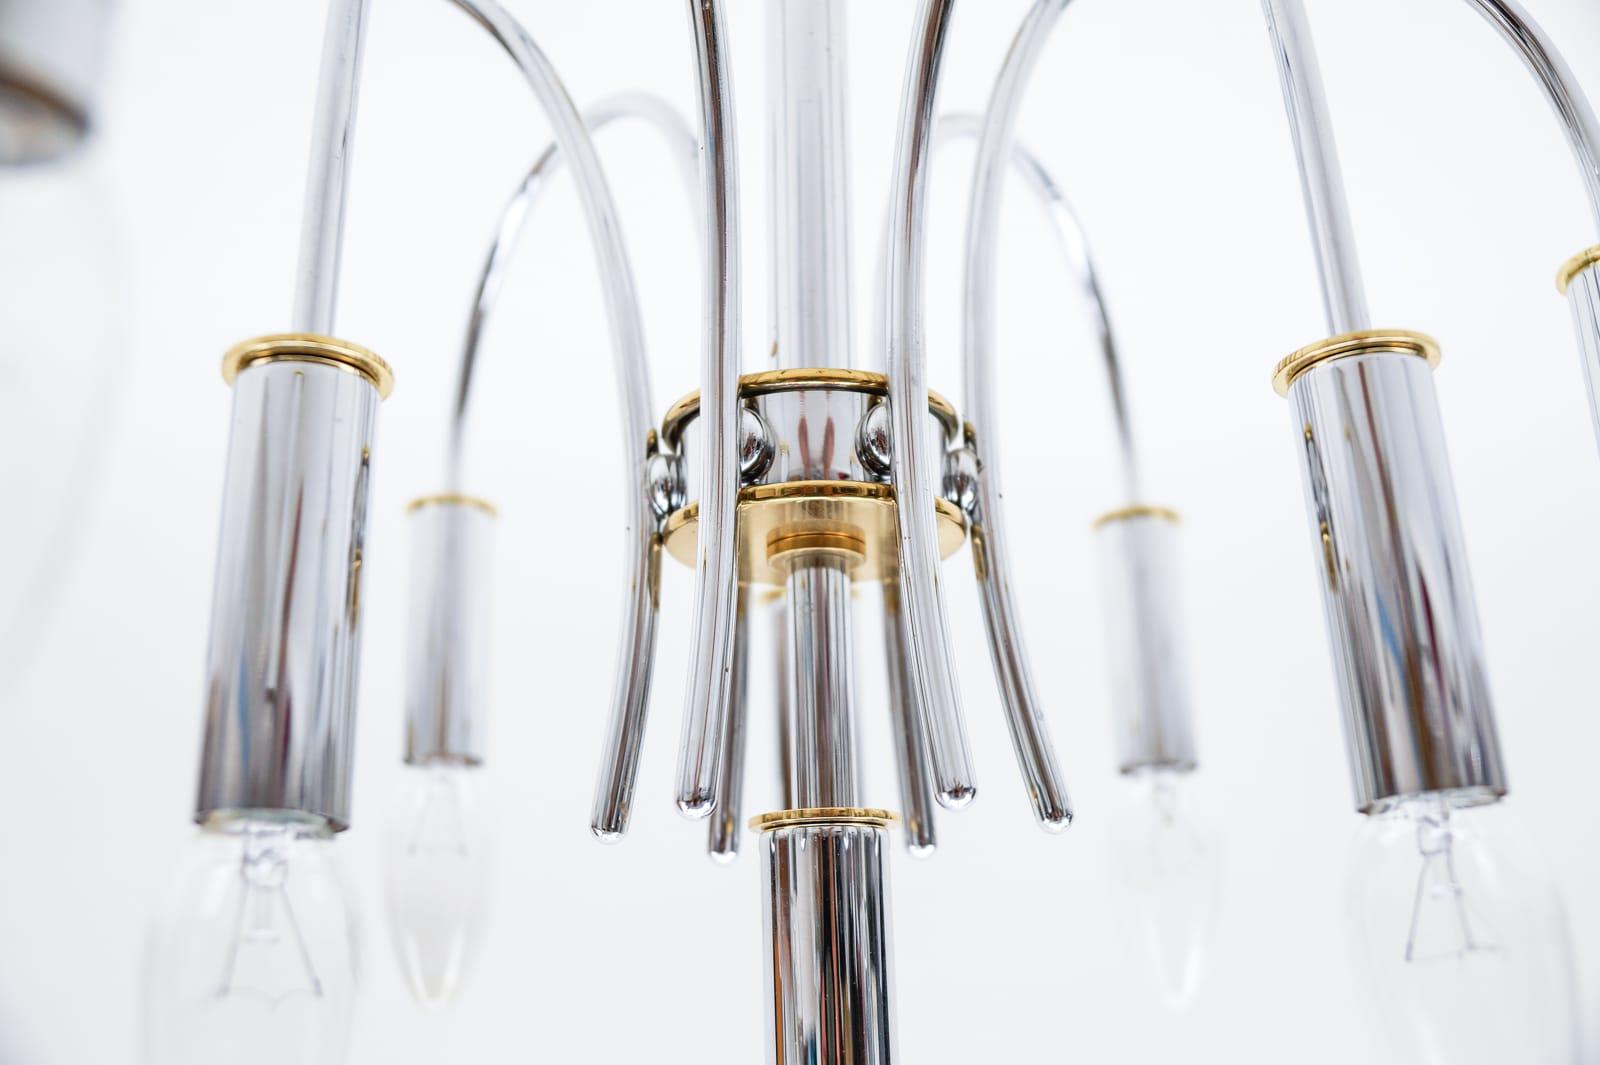 High Quality Chrome & Brass Ceiling Lamp by Schröder & Co., 1960s Germany For Sale 1